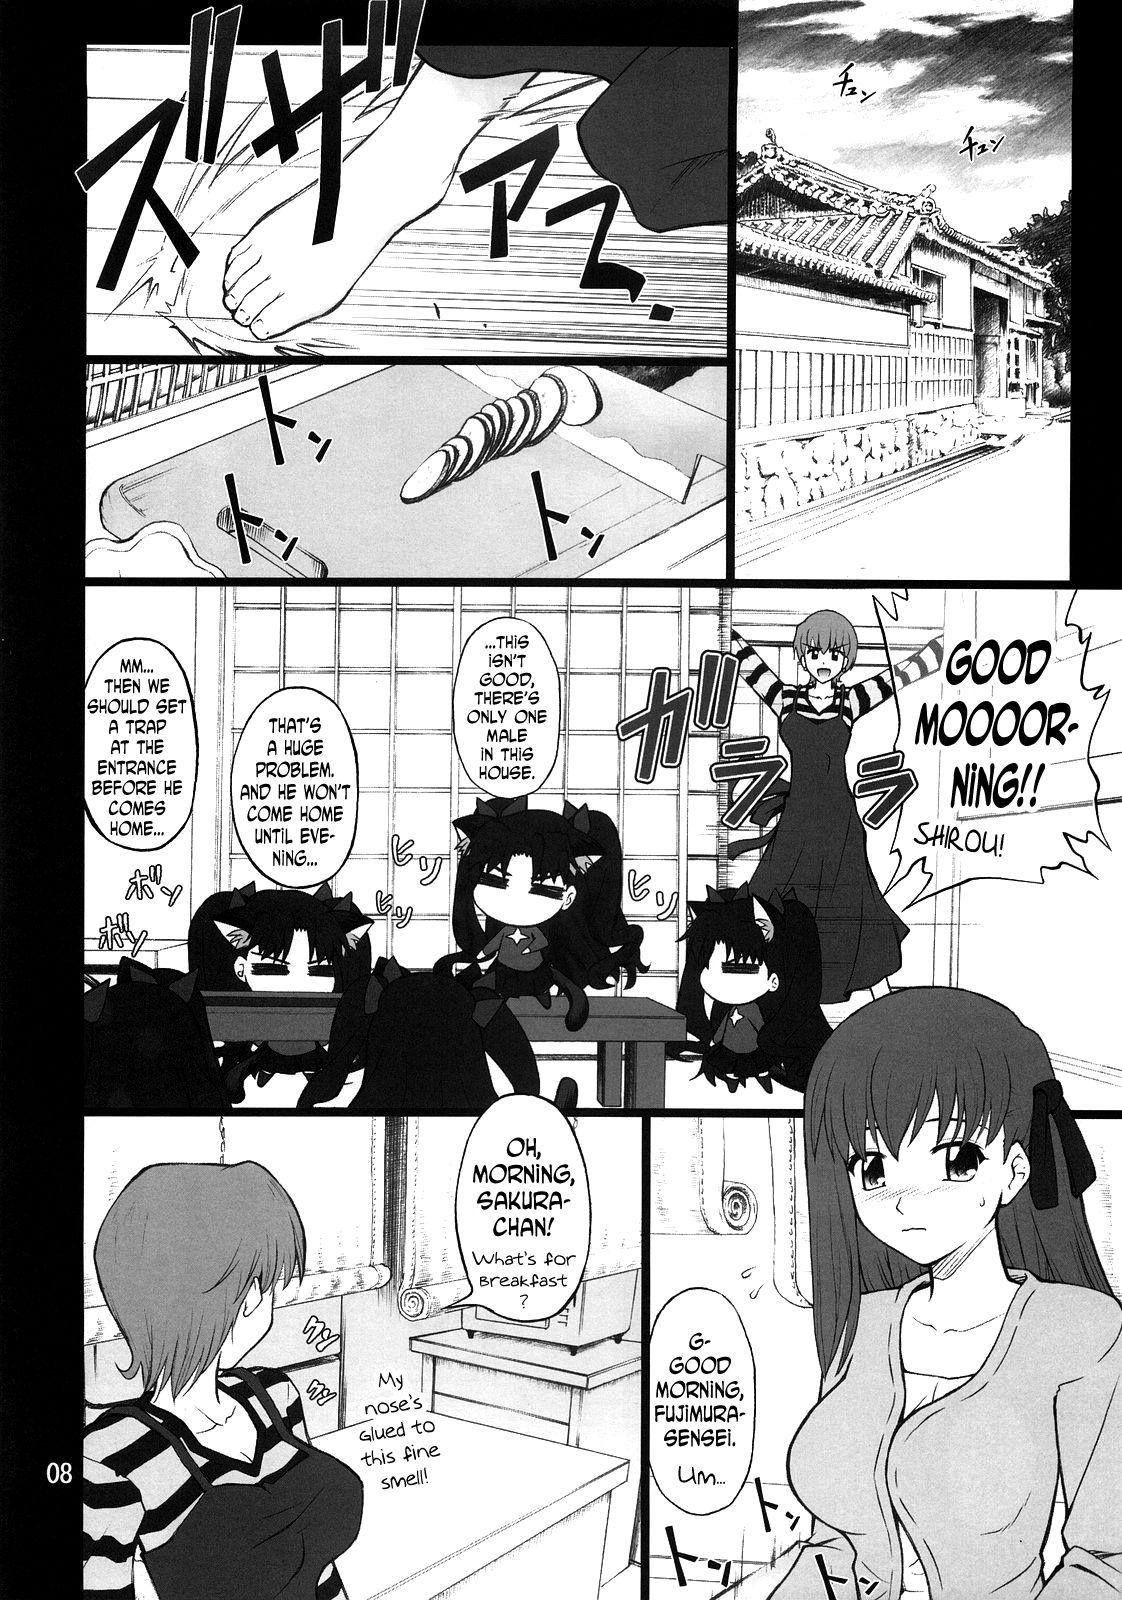 Strap On Grem-Rin 2 - Fate stay night Smalltits - Page 7